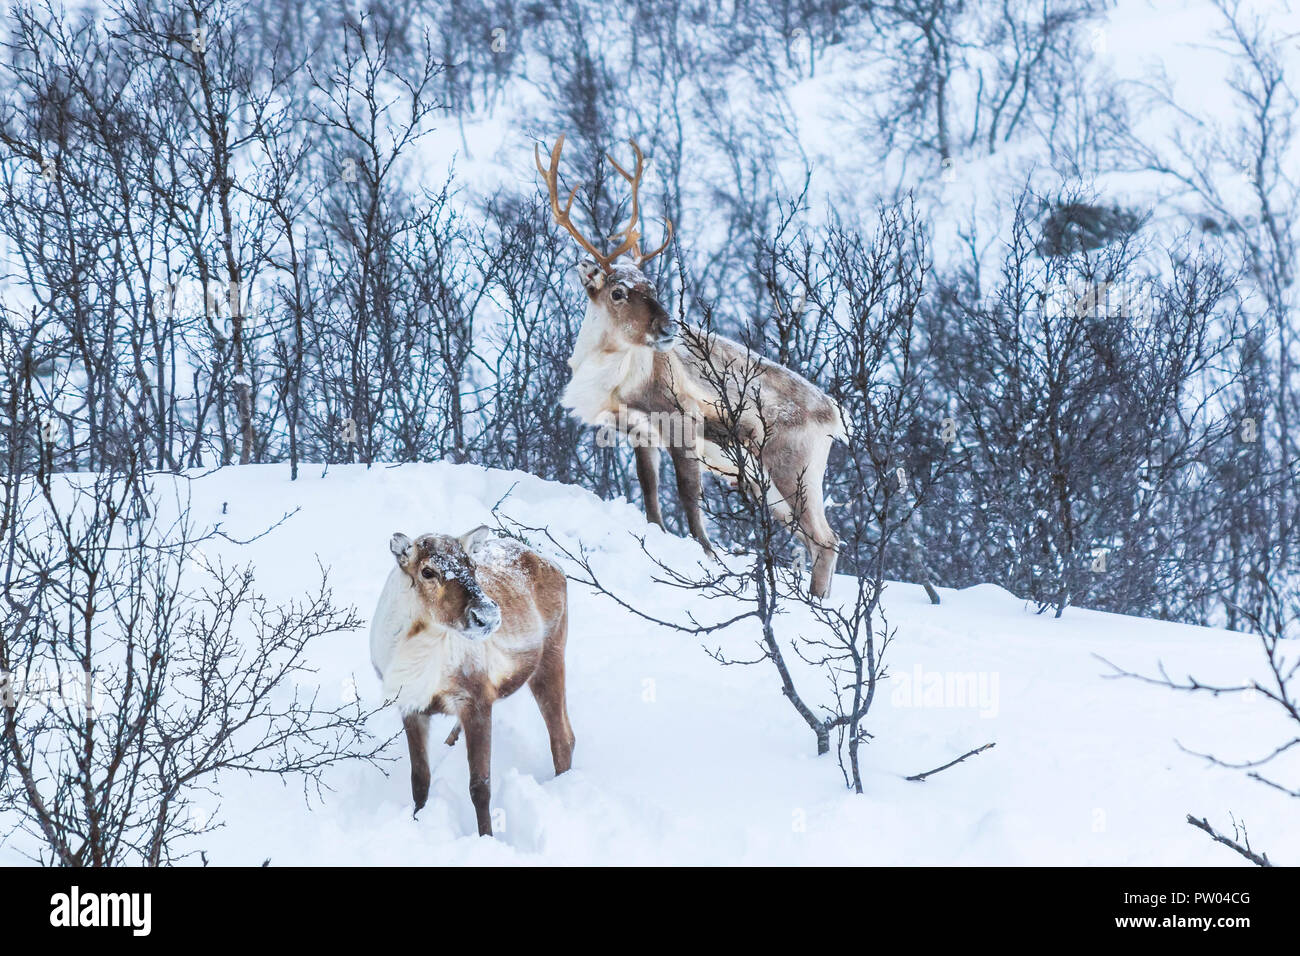 Scandinavian wild male and female reindeer or caribou standing in a forest with snow in the mountains during winter season. Stock Photo